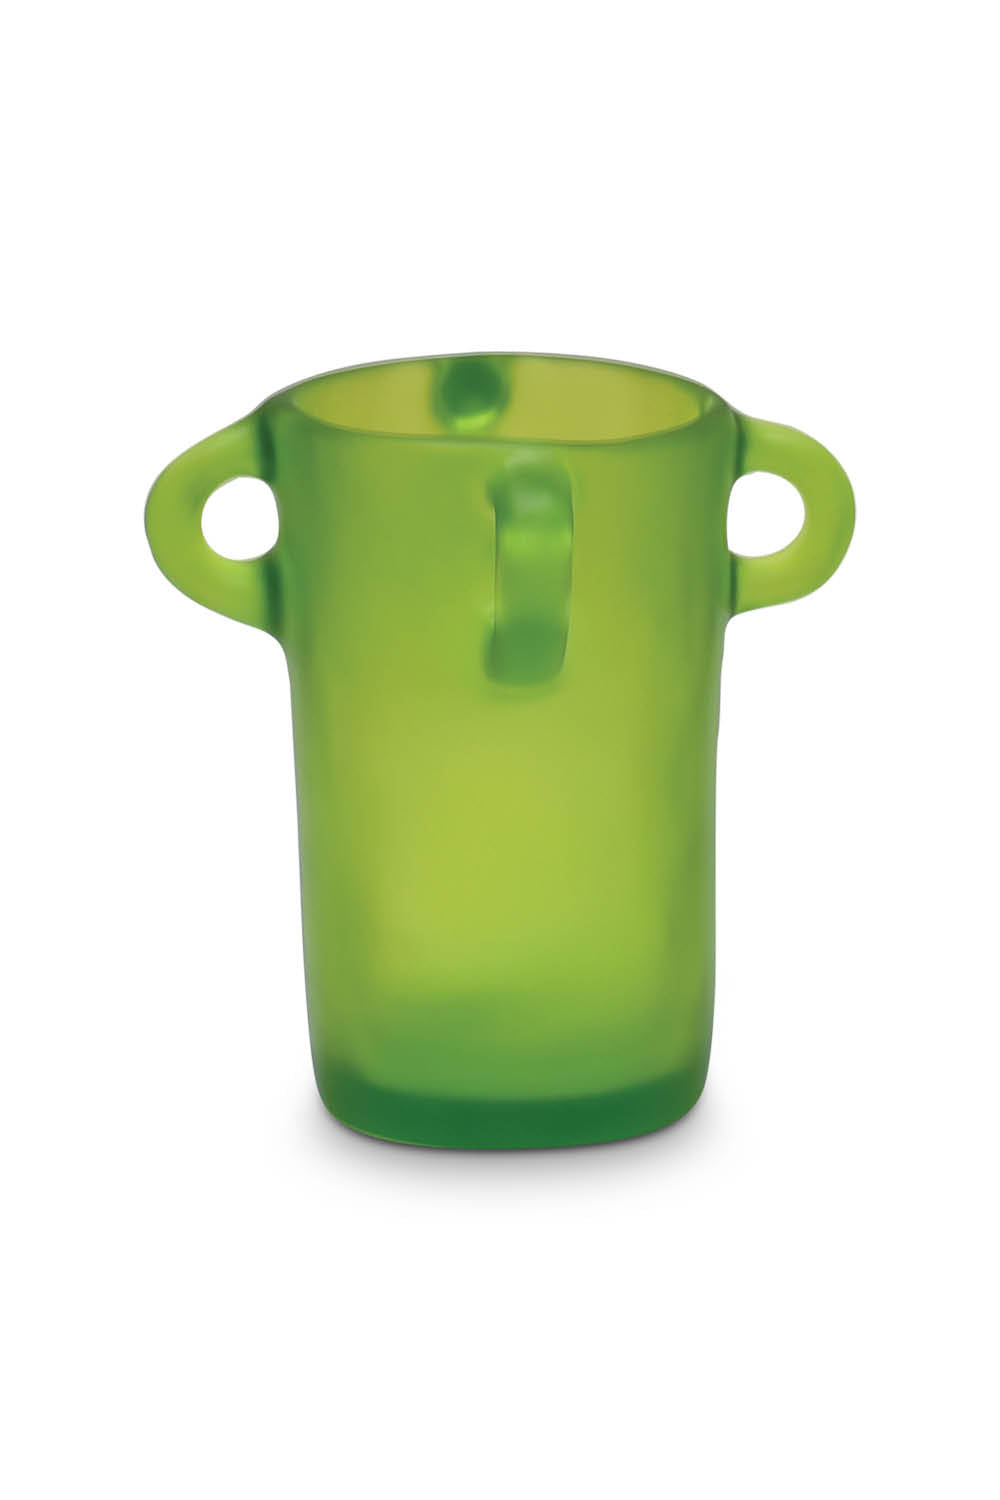 LOOPY Small Vase in Green